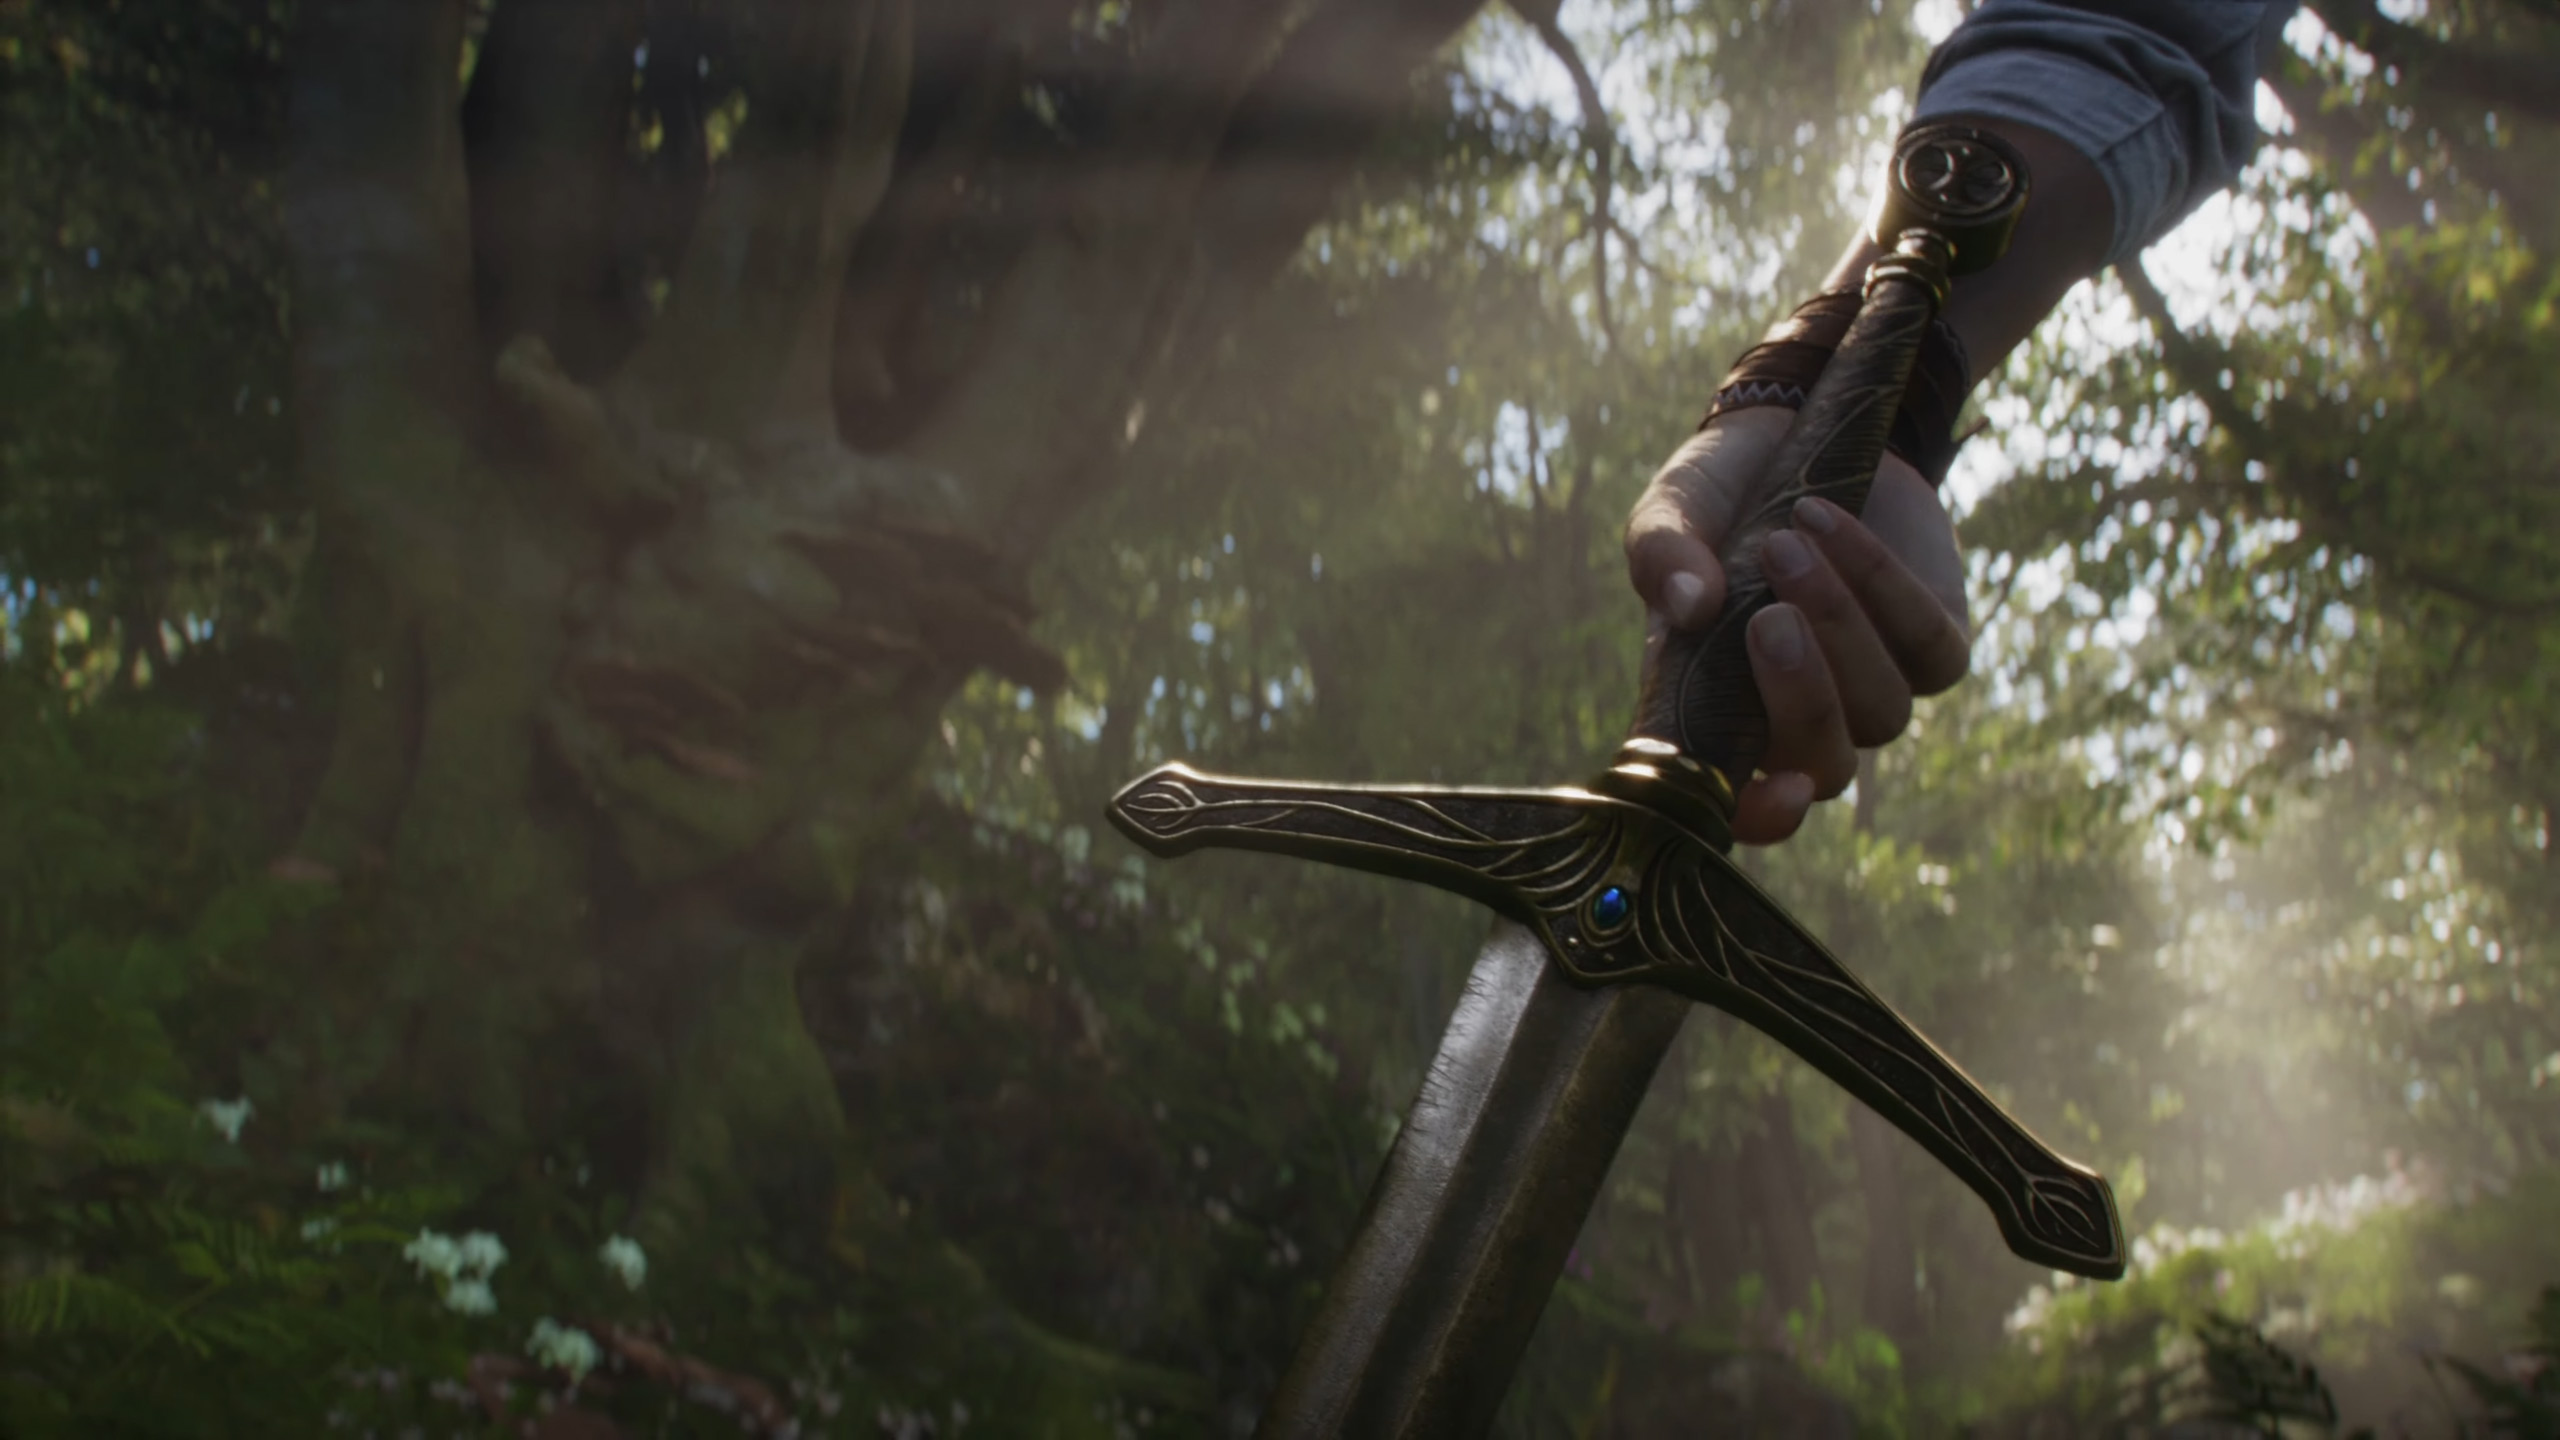 Fable gets another trailer, but we still don't know much about the game